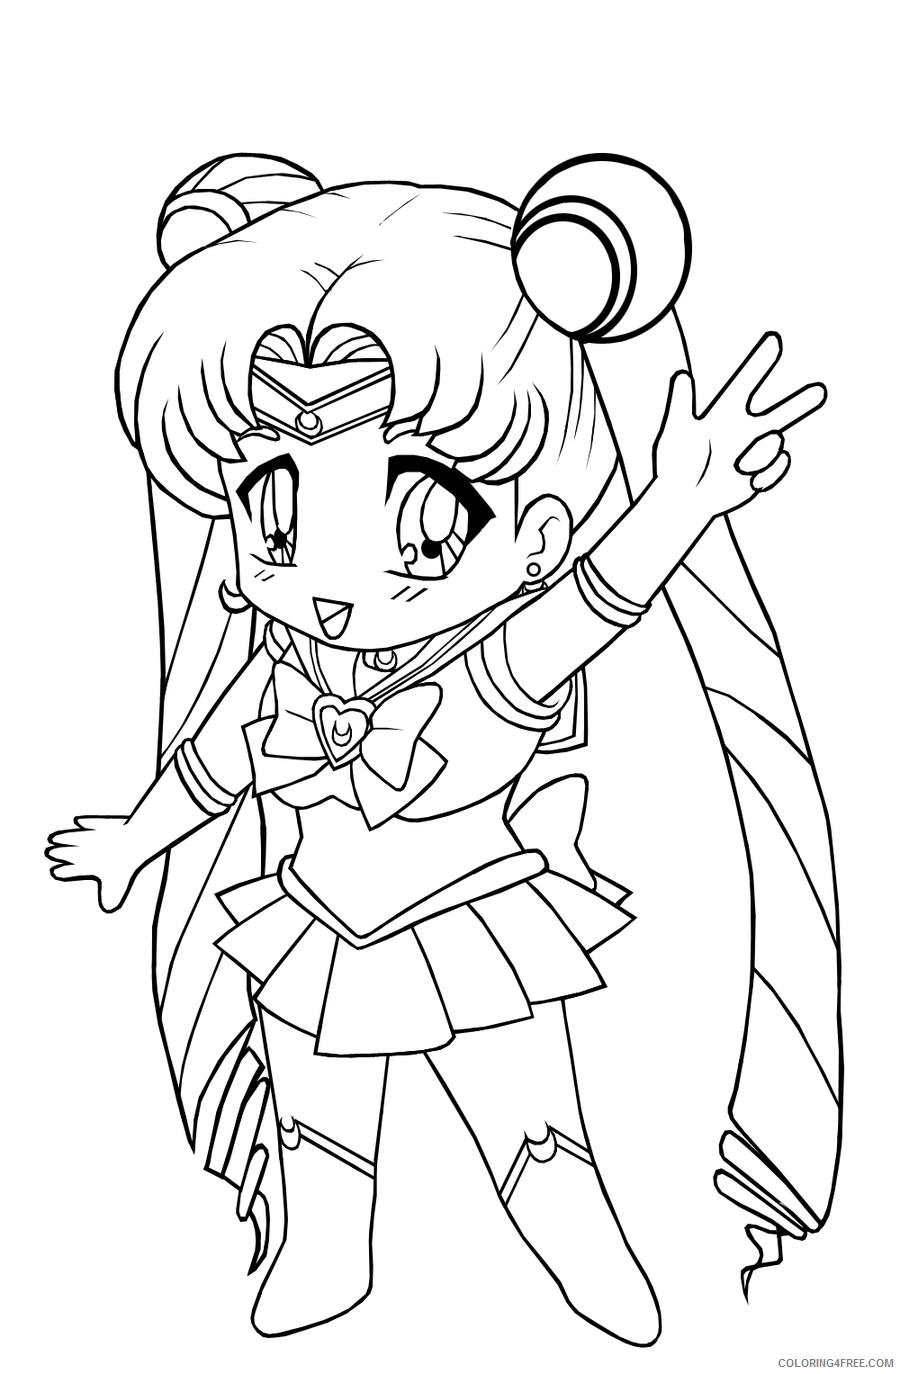 chibi coloring pages sailor moon Coloring4free